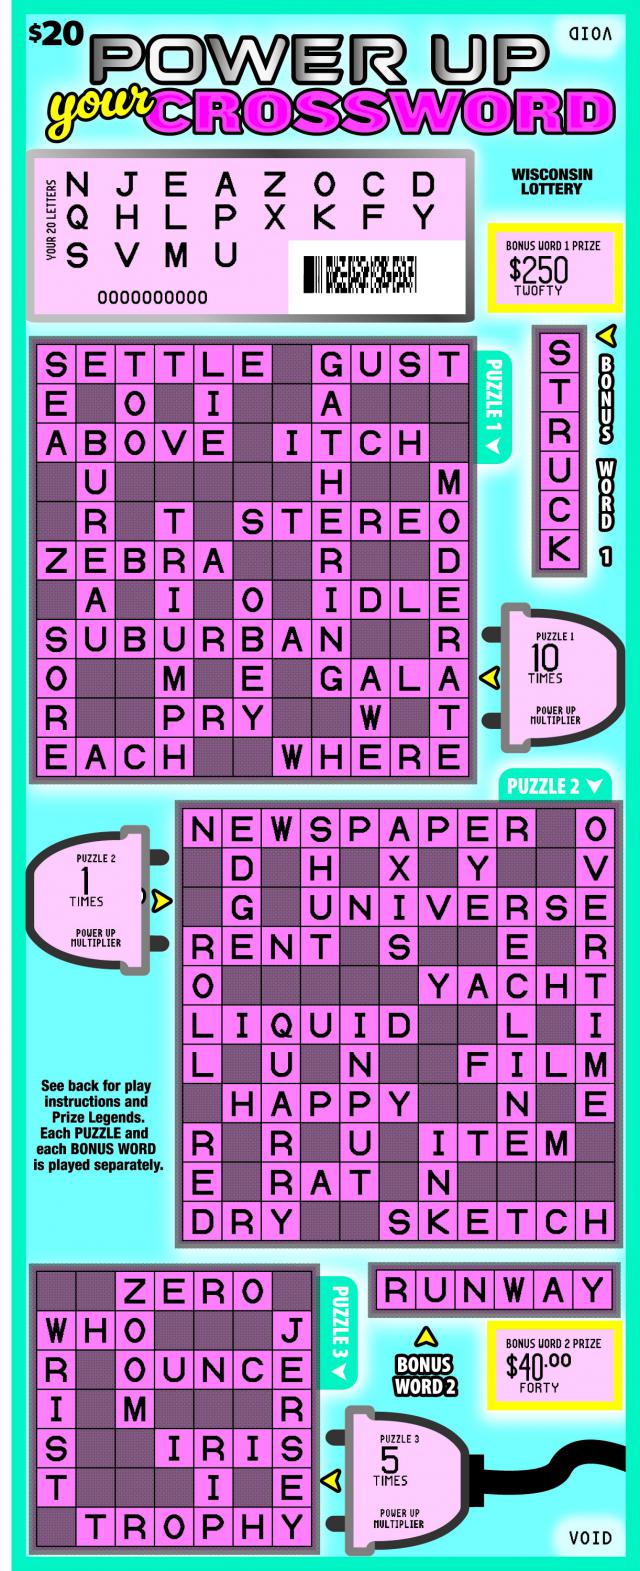 WI-Lottery-2131-Scratch-Game-Power-Up-Your-Crossword-Scratched